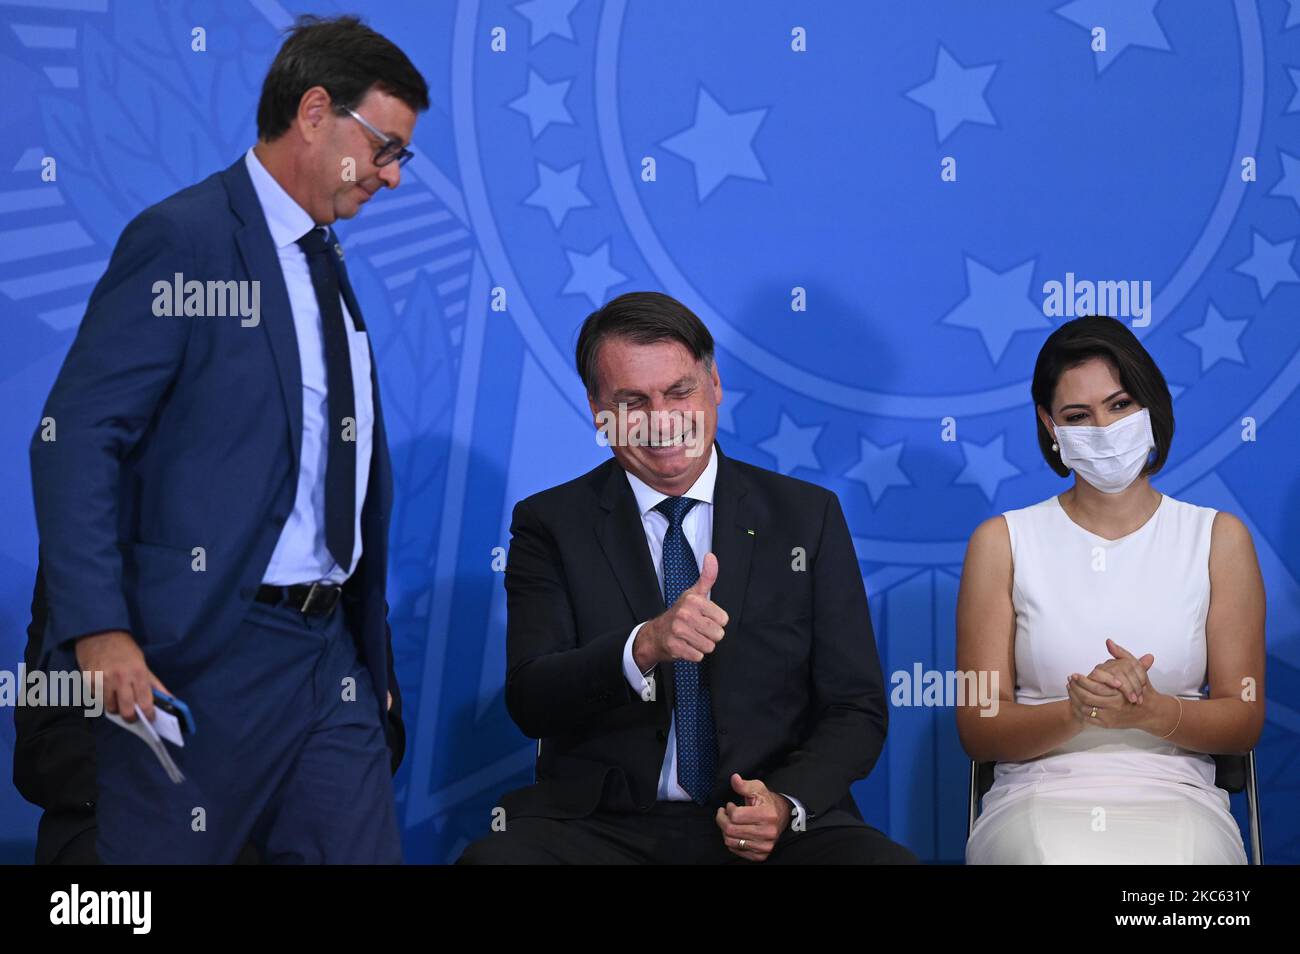 Brazil's President Jair Bolsonaro (center), next to Brazil's new Tourism minister Gilson Machado (left) and first lady Michelle Bolsonaro (right), reacts during the swearing-in ceremony of the Brazil's Tourism Minister Gilson Machado, amidst the Coronavirus (COVID - 19) pandemic at Planalto Palace on December 17, 2020 in Brasilia. (Photo by Andre Borges/NurPhoto) Stock Photo